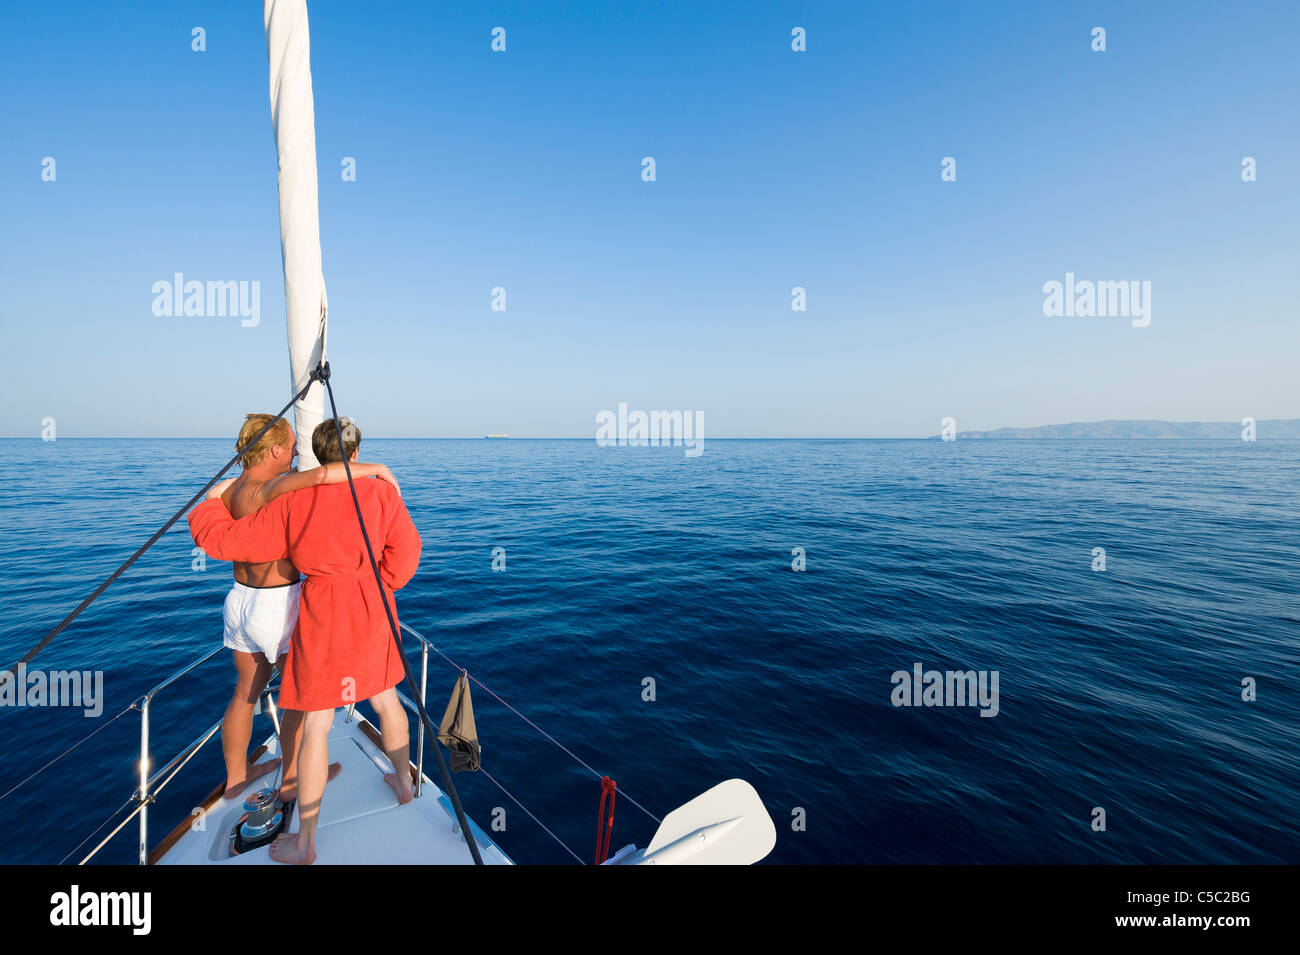 Rear view of teenage couple on the boat overlooking the blue sea against clear sky Stock Photo